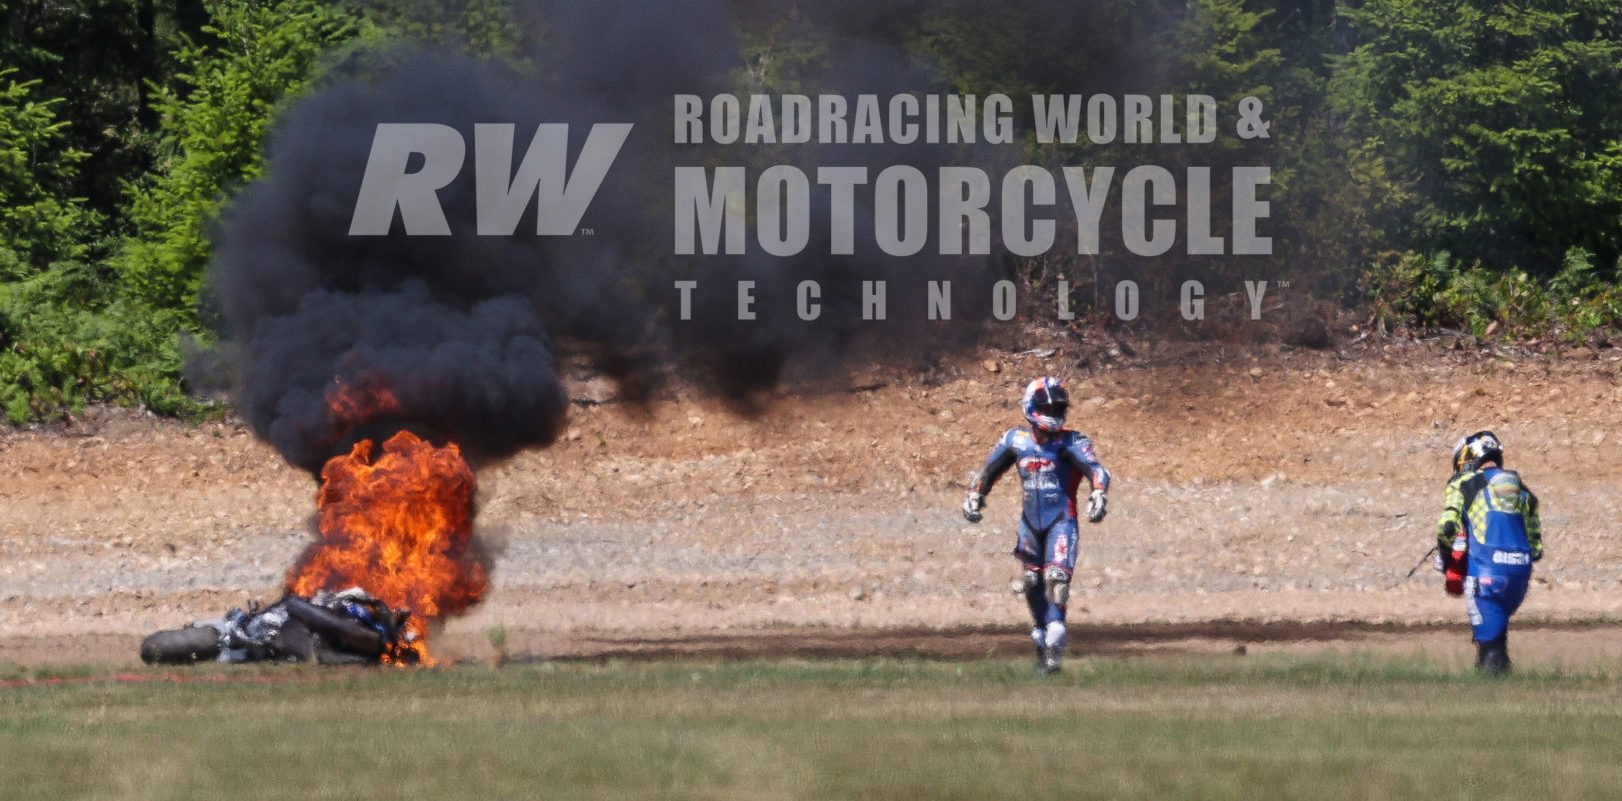 Bobby Fong suffered a high-speed crash during testing June 24 at Ridge Motorsports Park, and the first person to respond to the scene was fellow racer Jeremy Coffey carrying a fire extinguisher he took from a cornerworker station. Photo by Brian J. Nelson.